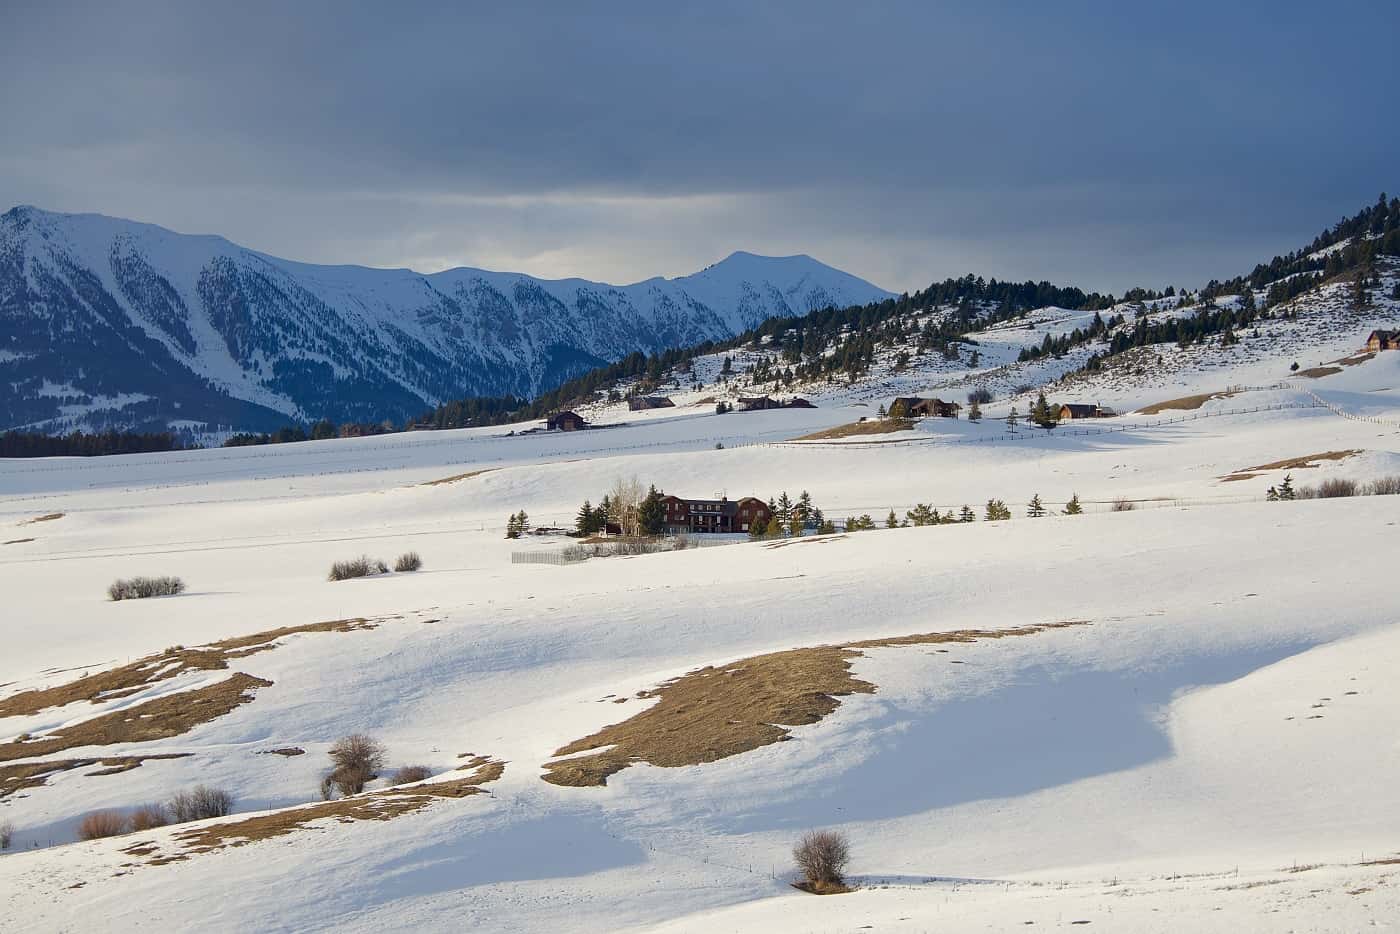 Scenic view of Howler's Inn during the winter